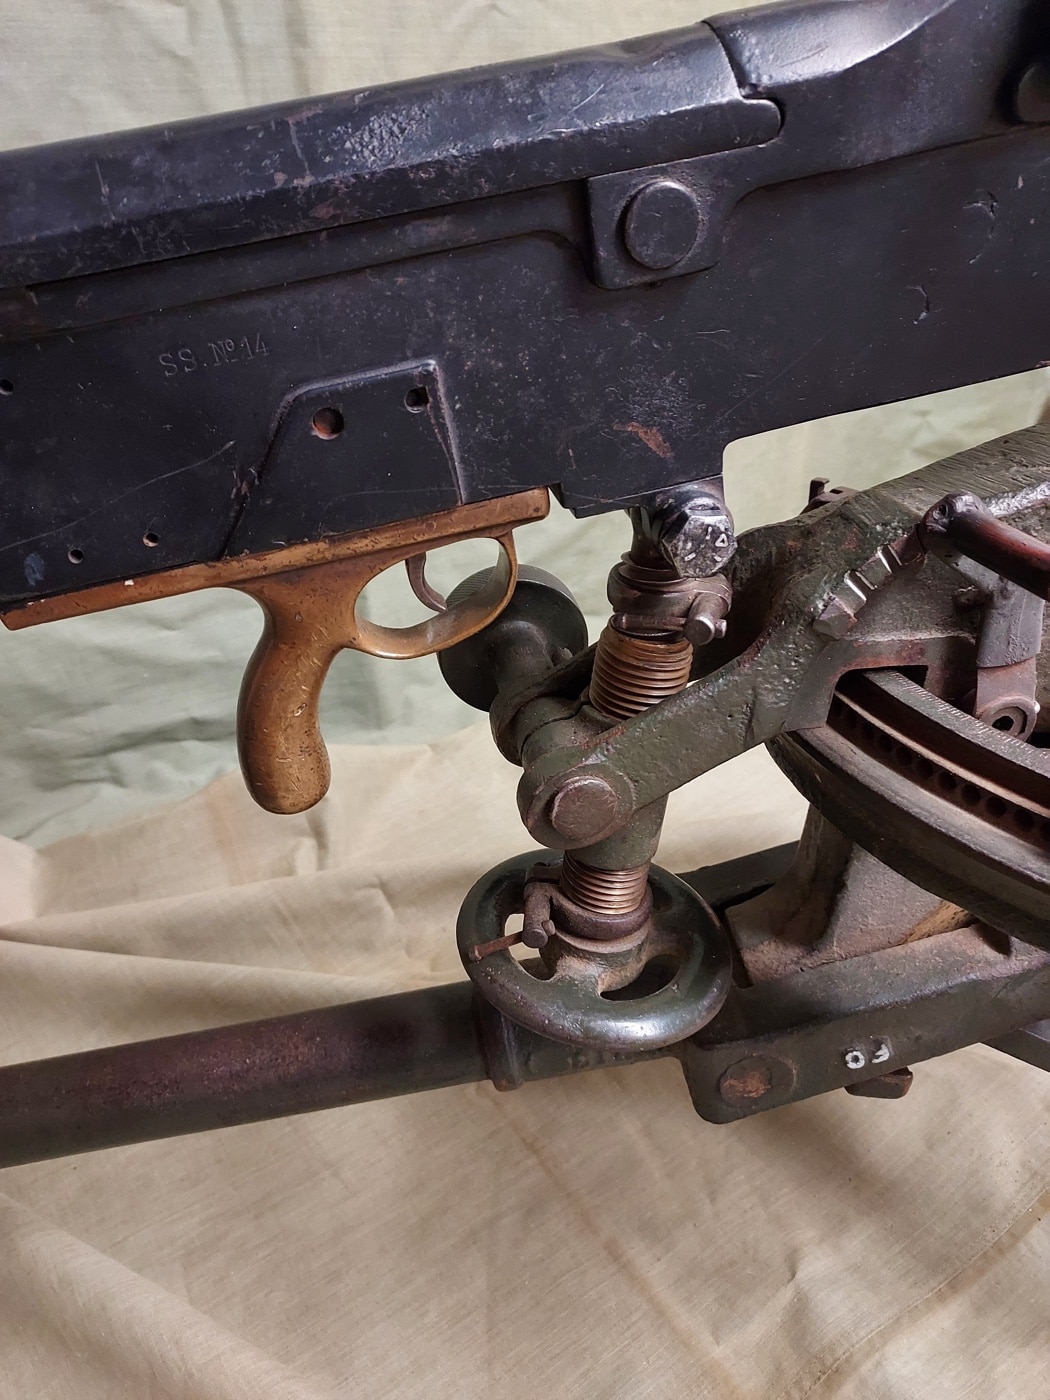 This is a detail photo of the pistol grip and trigger of the machine gun. The line of nearly identical Hotchkiss designs bucked some of the conventional wisdom starting with the Model 1897. This final form by Hotchkiss Armament was both different and easy to operate.